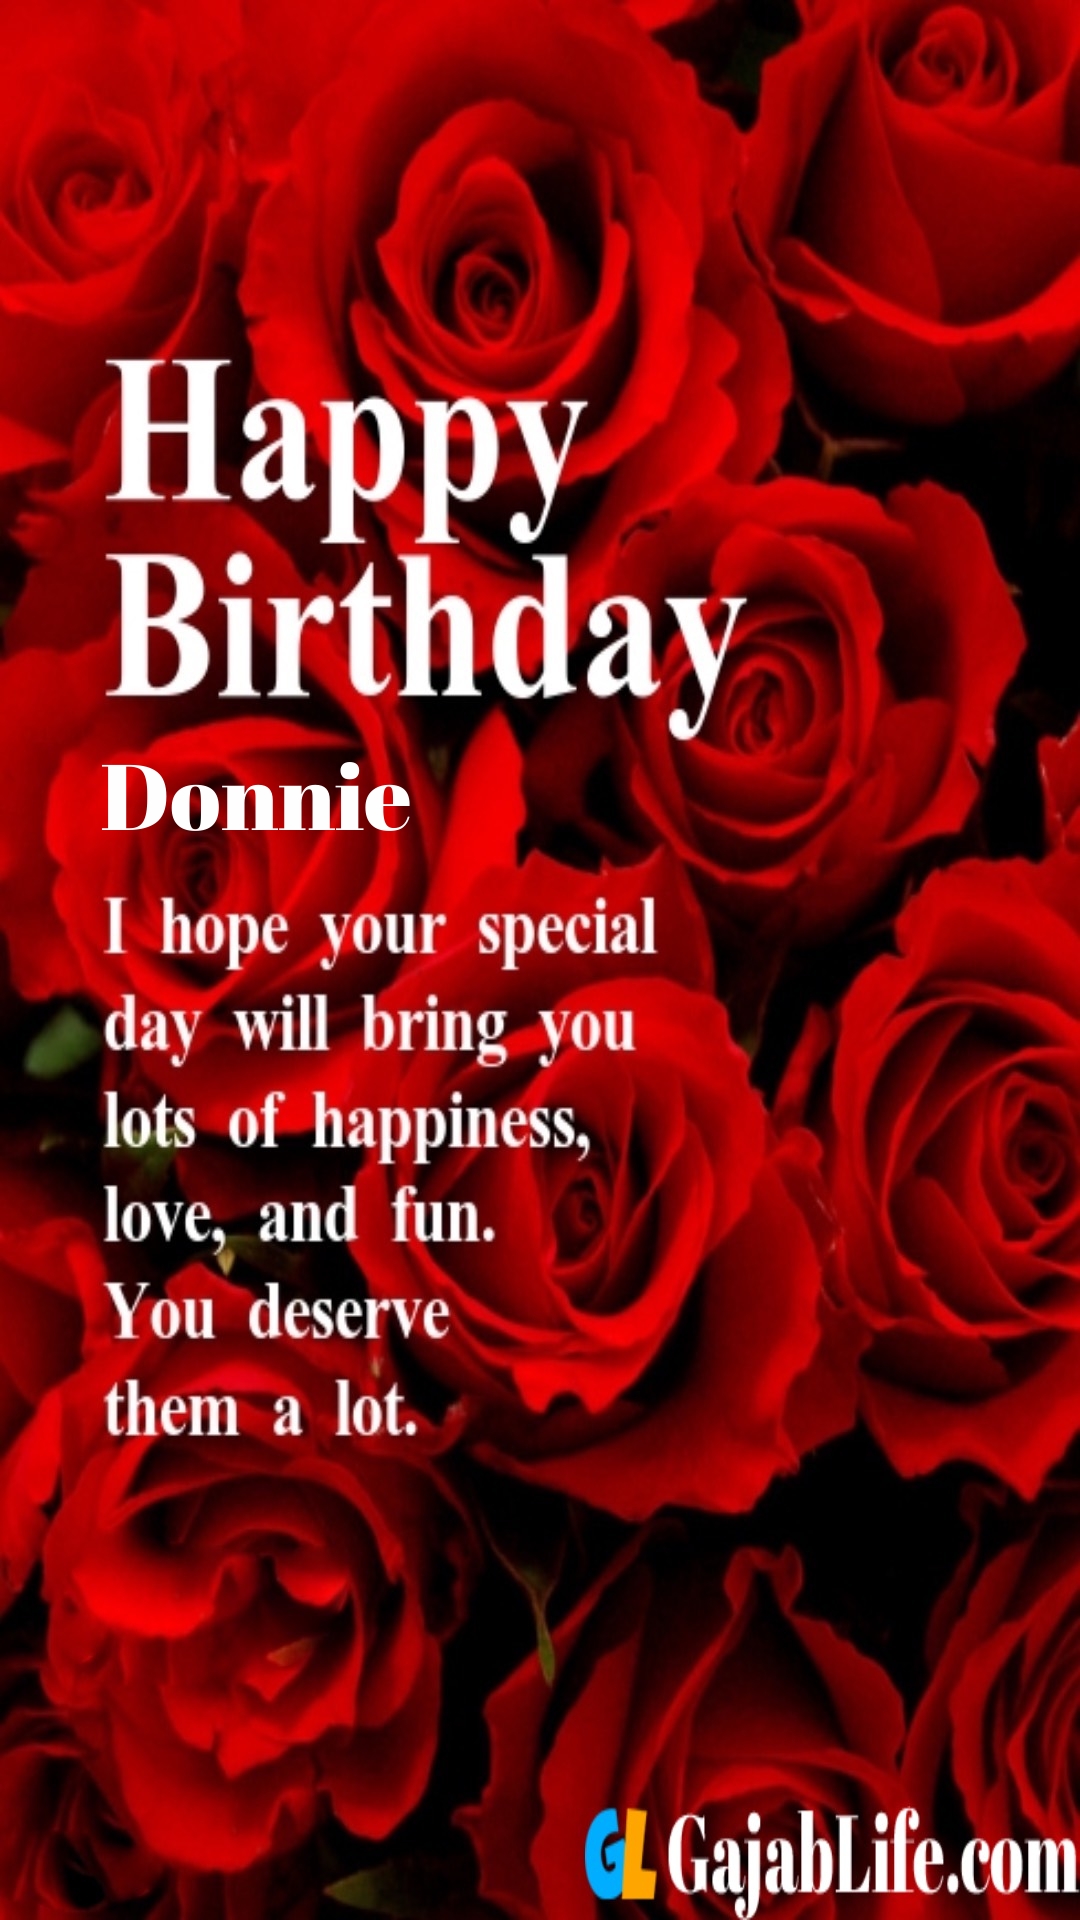 Romantic Birthday Wishes Quotes & Images for donnie love